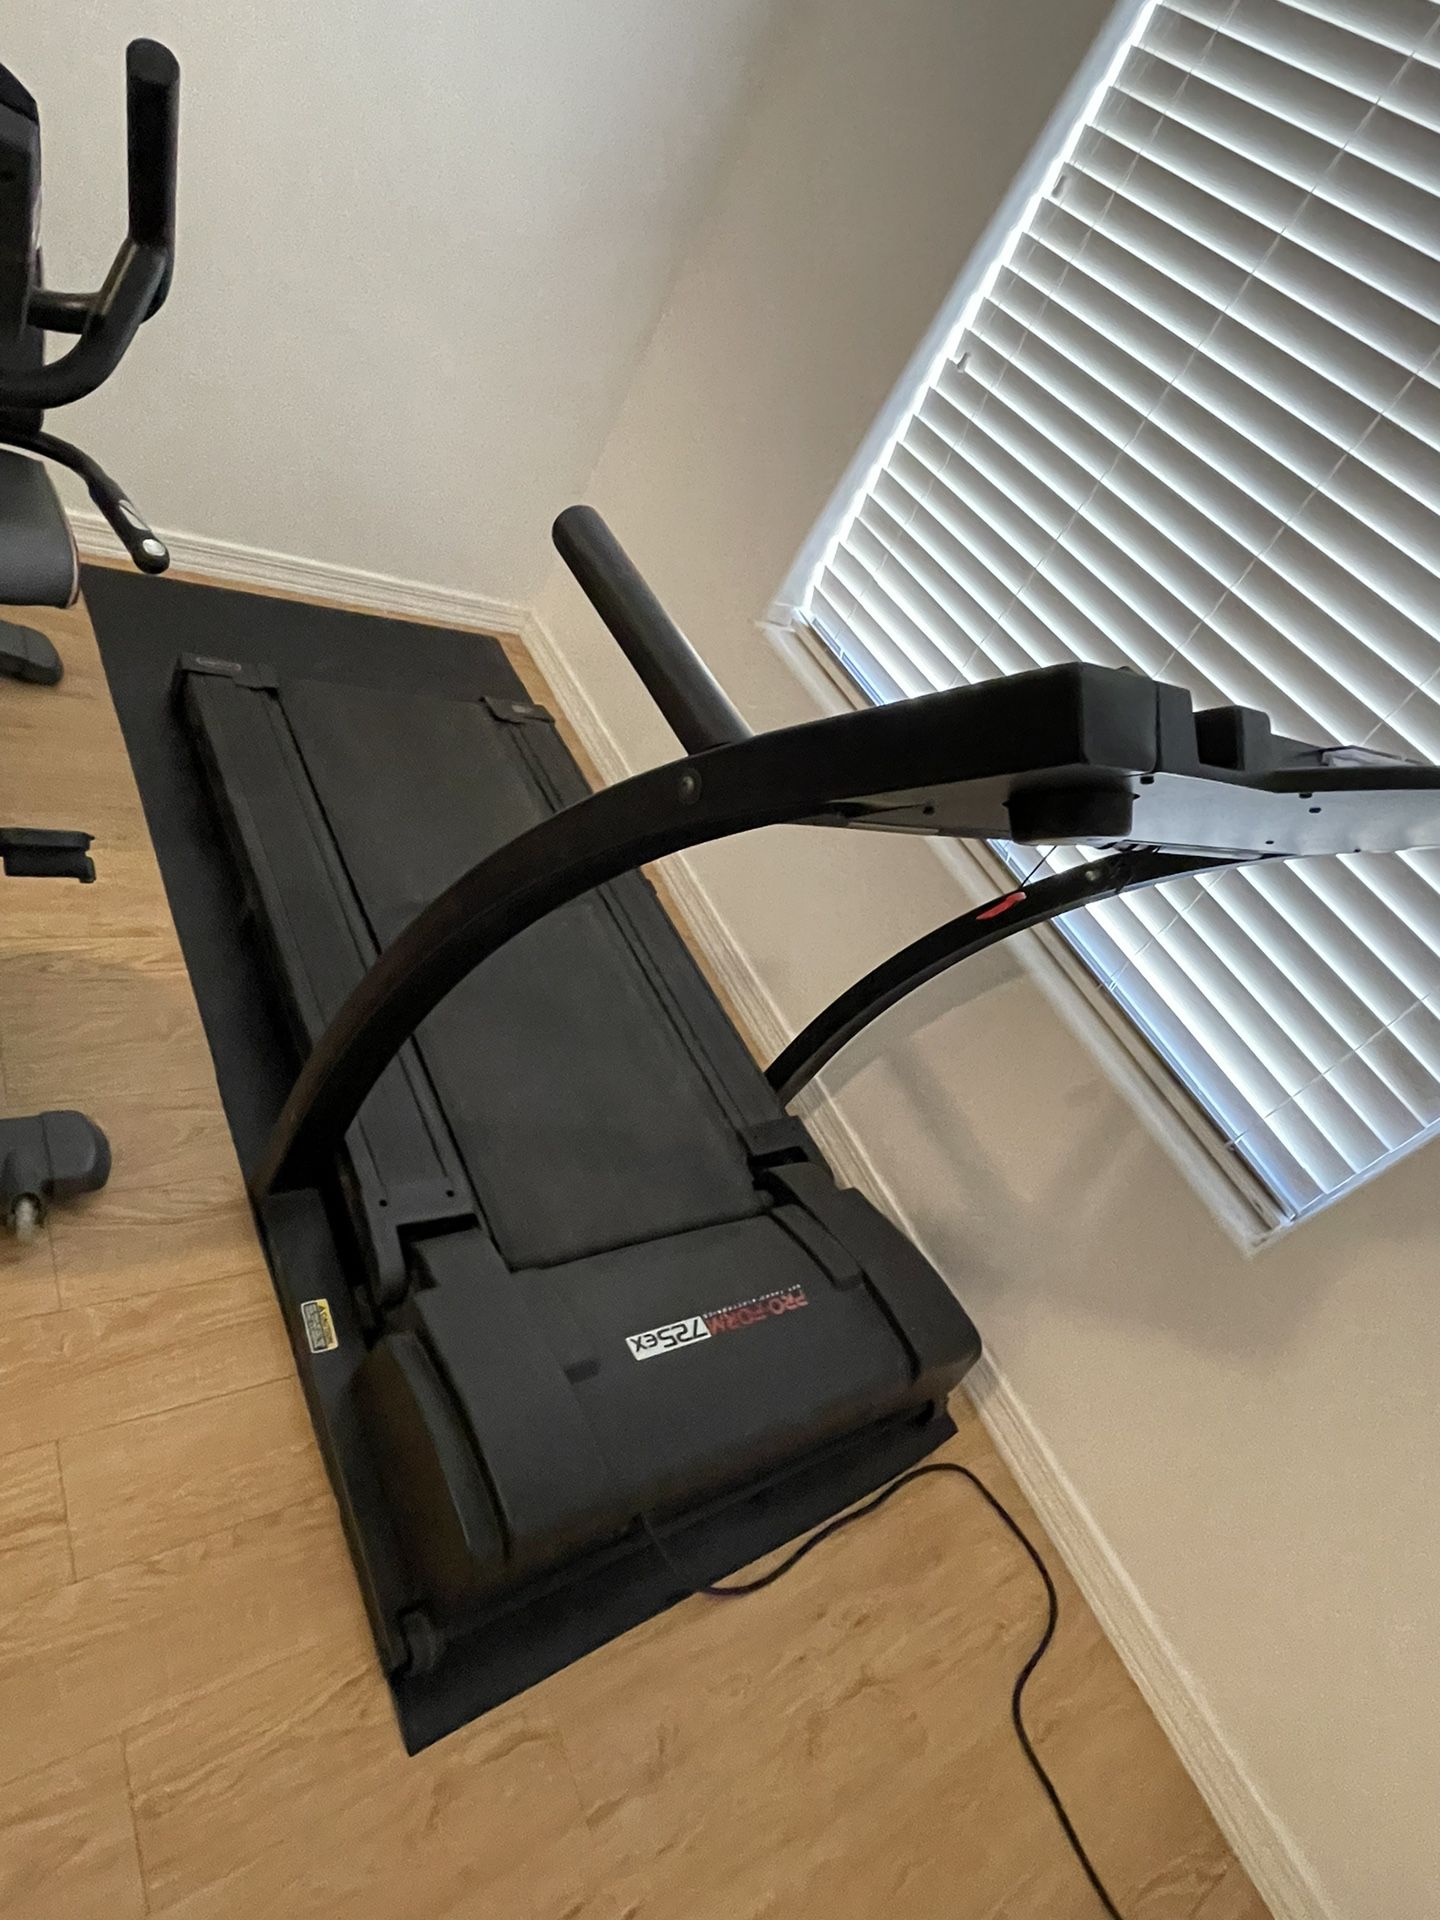 Treadmill And Other Exercise Equipment 